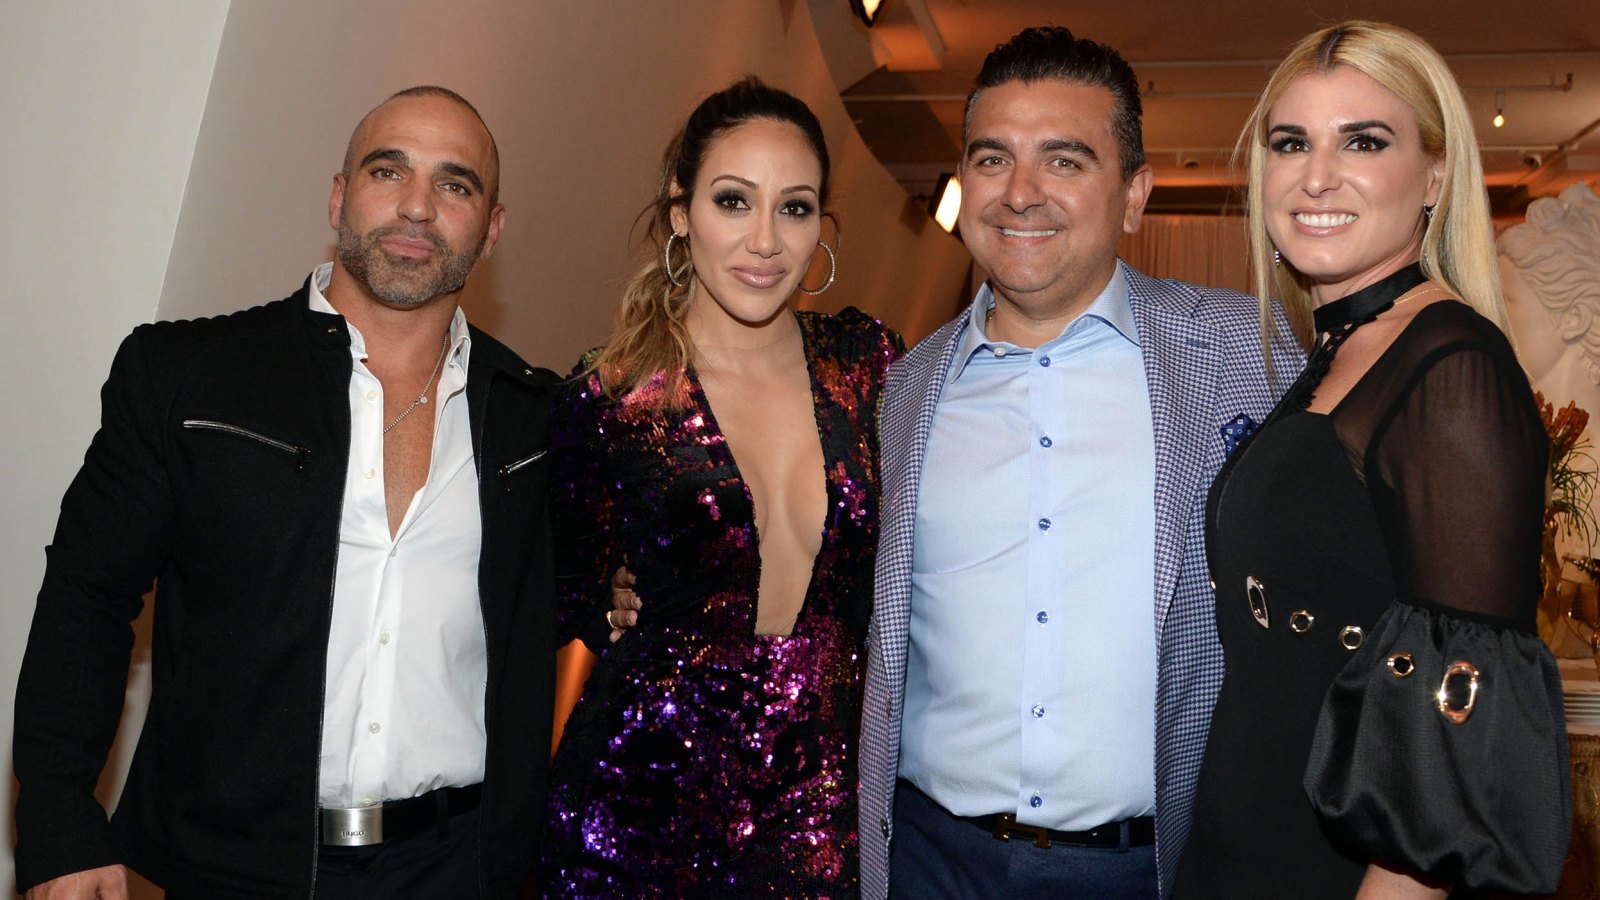 Buddy Valastro Talks Friendship With 'Real Housewives of New Jersey' Stars Joe and Melissa Gorga